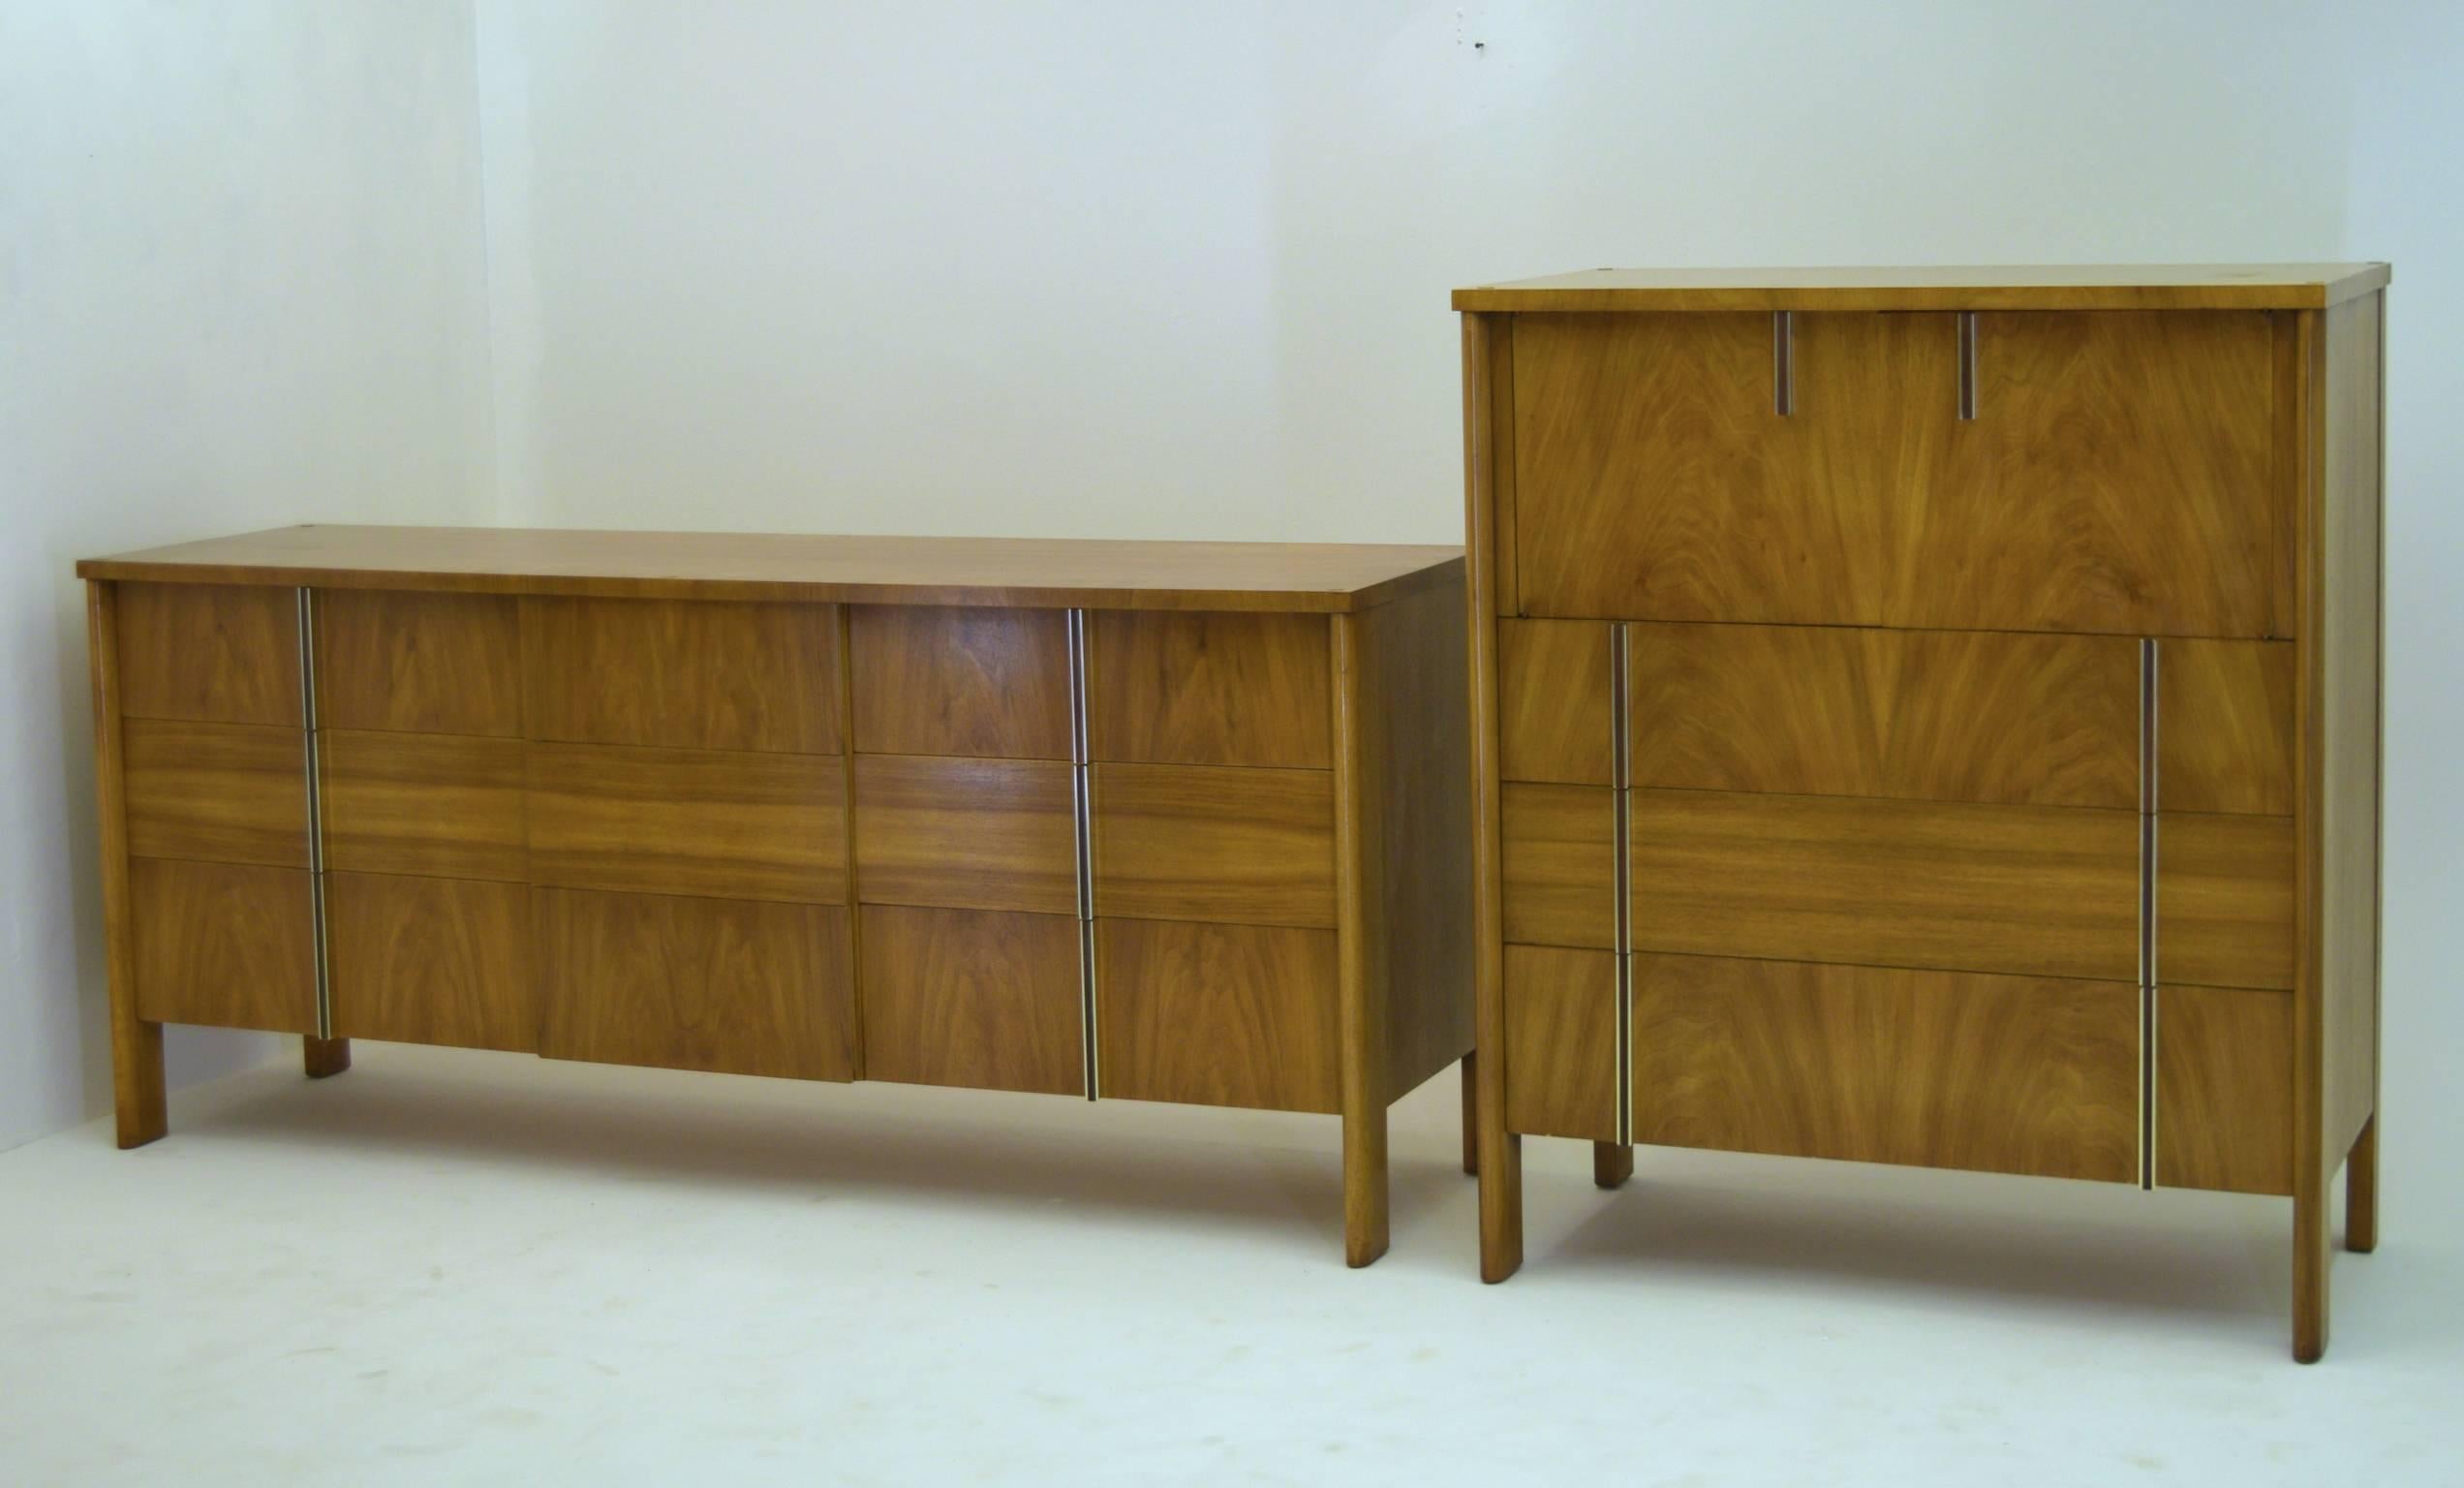 Produced in the early 1950s, this set of bedroom furniture by John Widdicomb represents some of the finest work from the cabinetmaker with craftsmanship
more commonly seen with the T.H. Robsjohn-Gibbings pieces.

These pieces are large, deeper